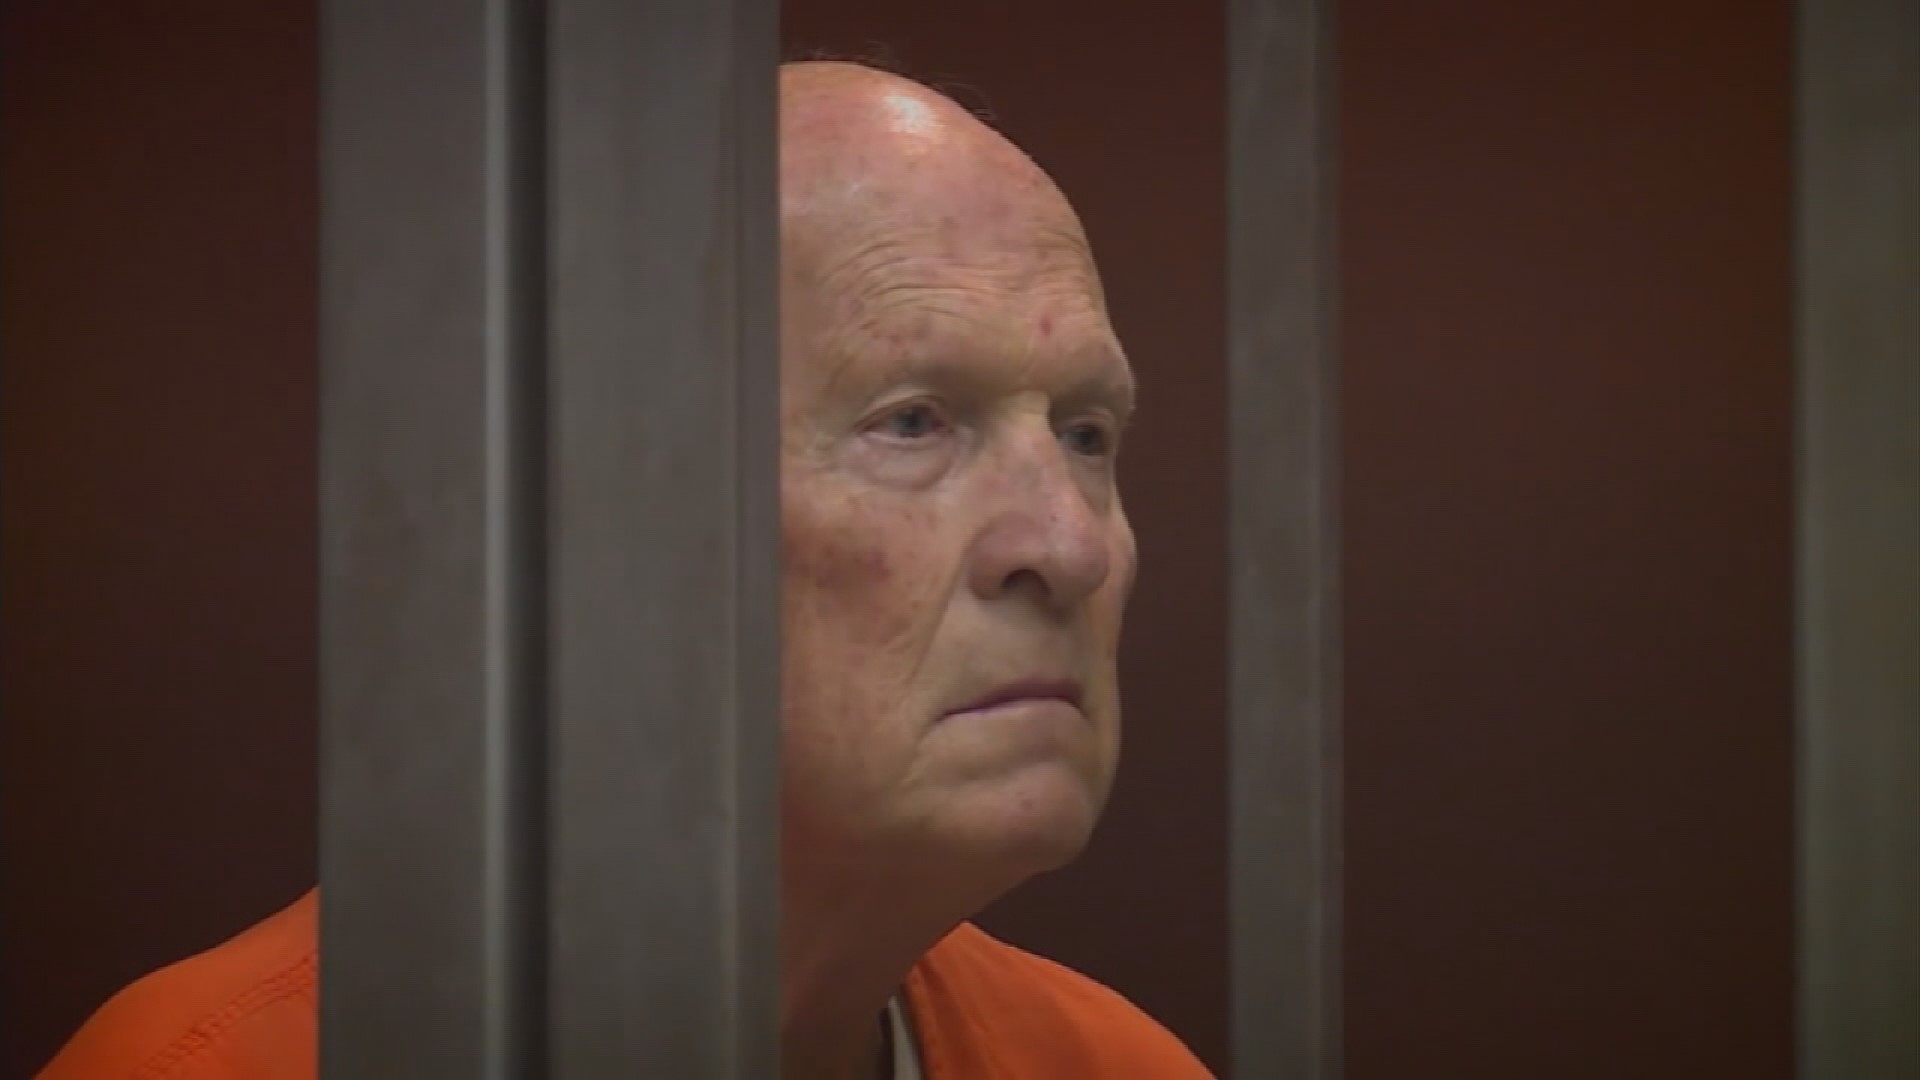 Investigators used DNA to connect him to 13 murders and more than 50 rapes across California in the 1970s and 80s. The suspect, Joseph James DeAngelo, is in jail waiting for his trial, which could still take several years.